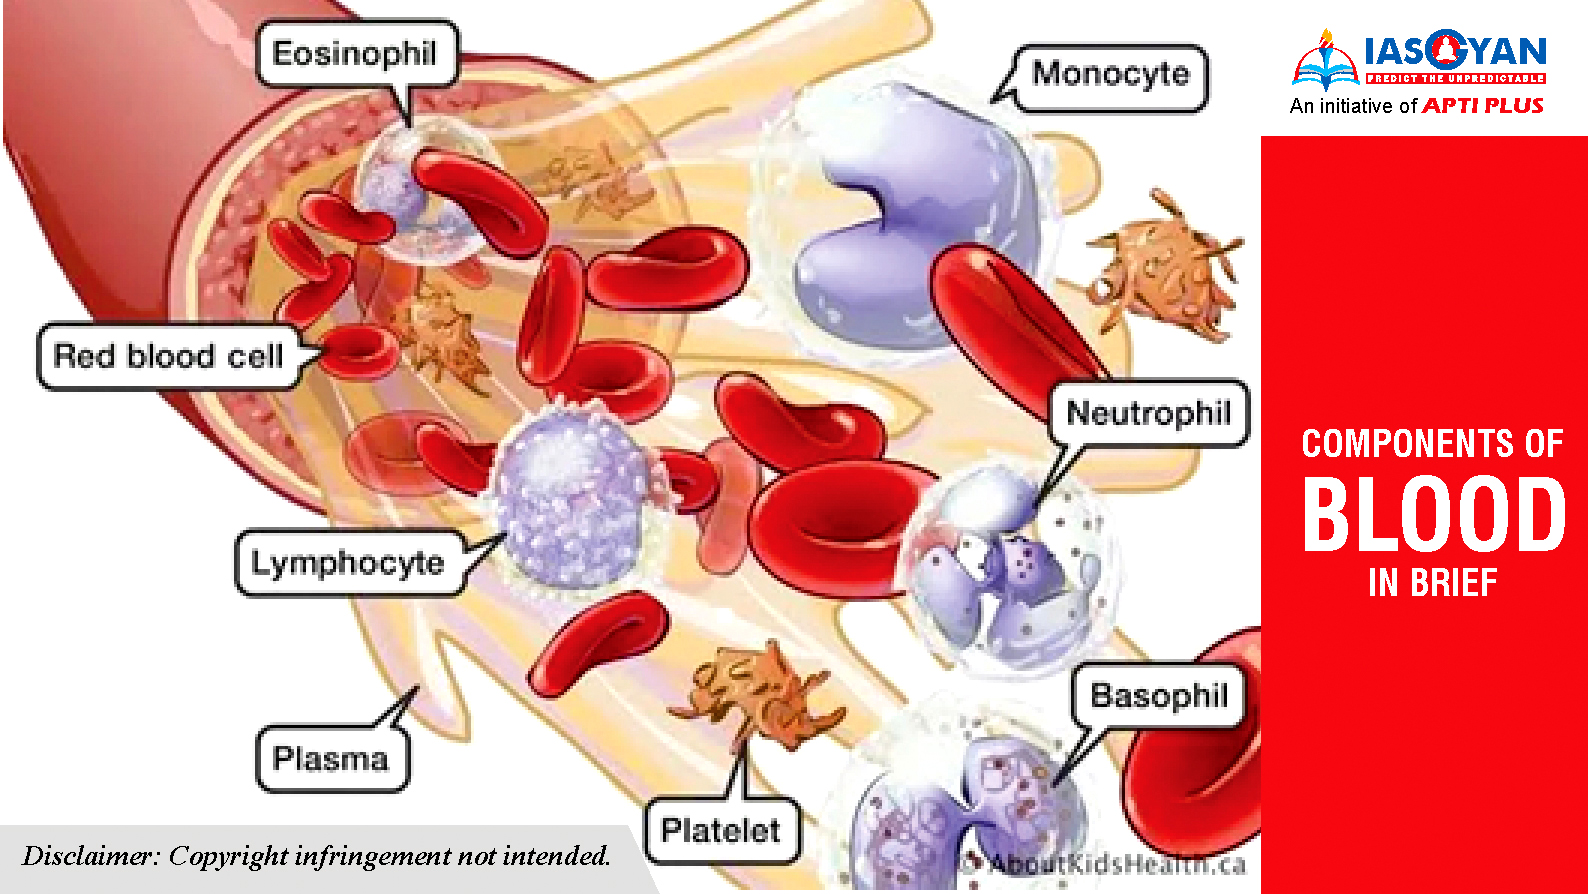 COMPONENTS OF BLOOD IN BRIEF